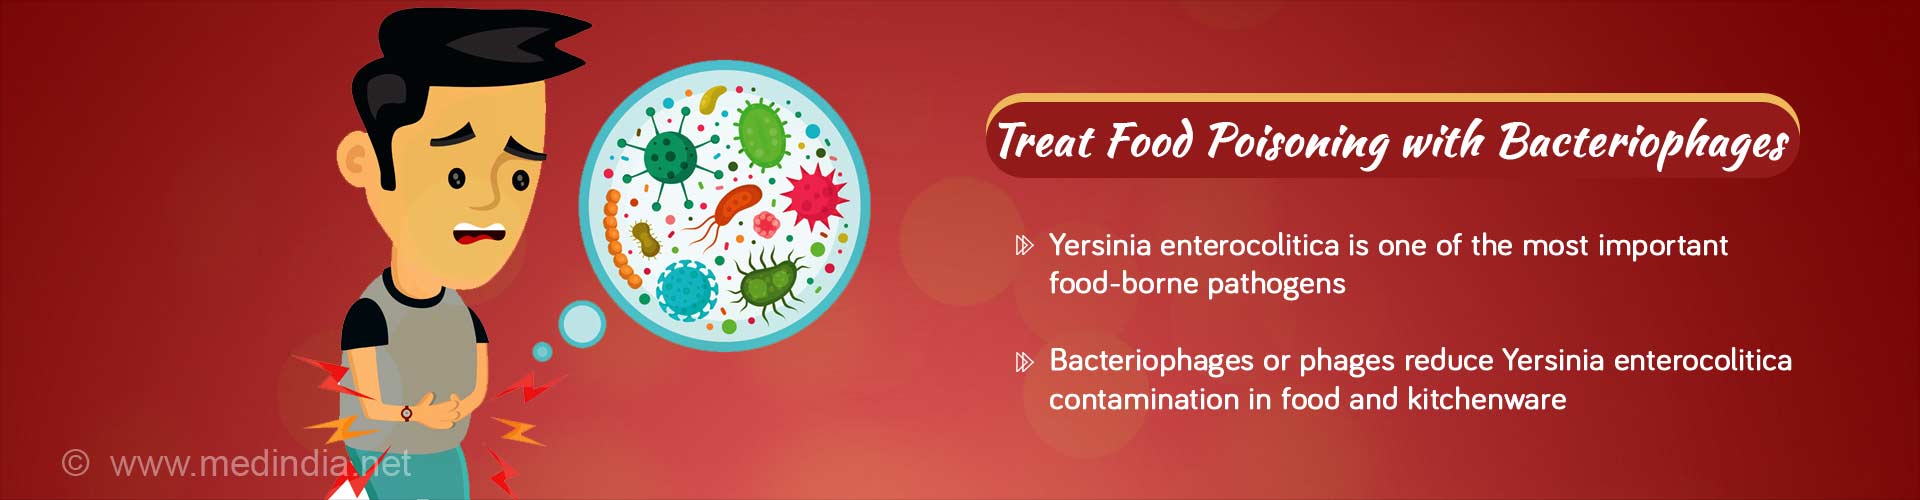 treat food poisoning with bacteriophages
- yersinia enterocolitica is one of the most important food-borne pathogens
- bacteriophages or phages reduce yersinia enterocolitica contamination in food and kitchenware